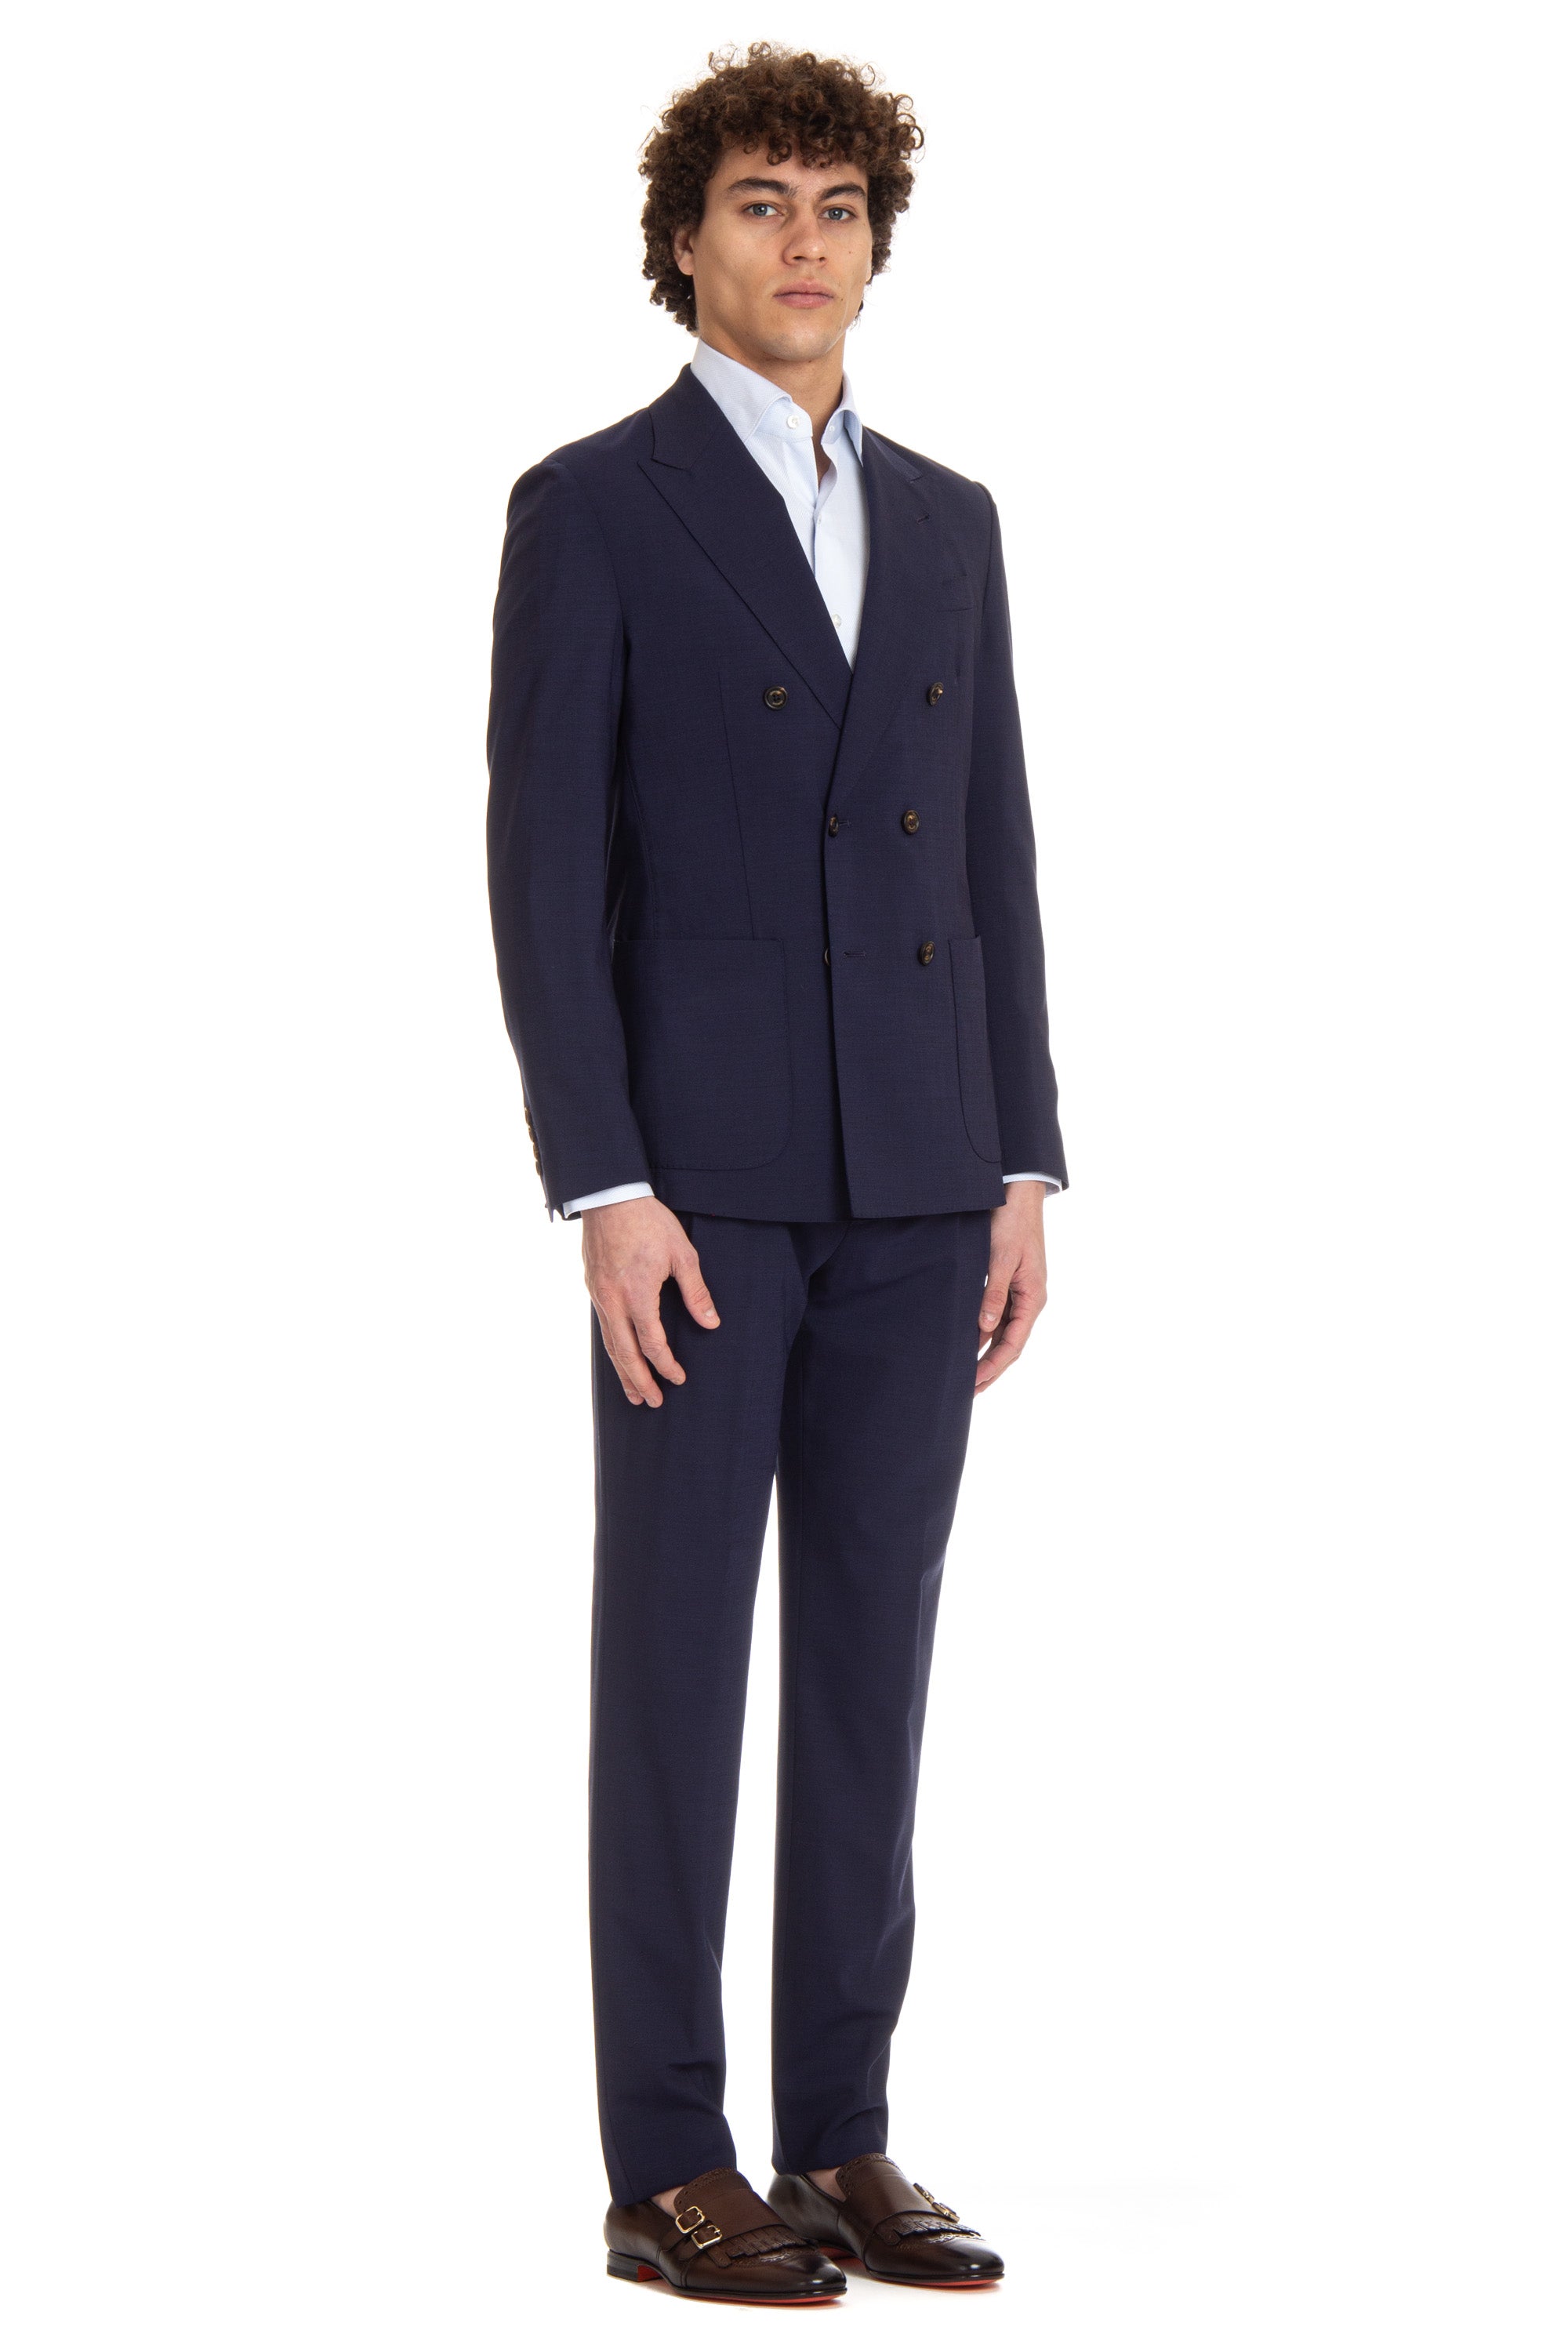 Double-breasted suit in comfort wool